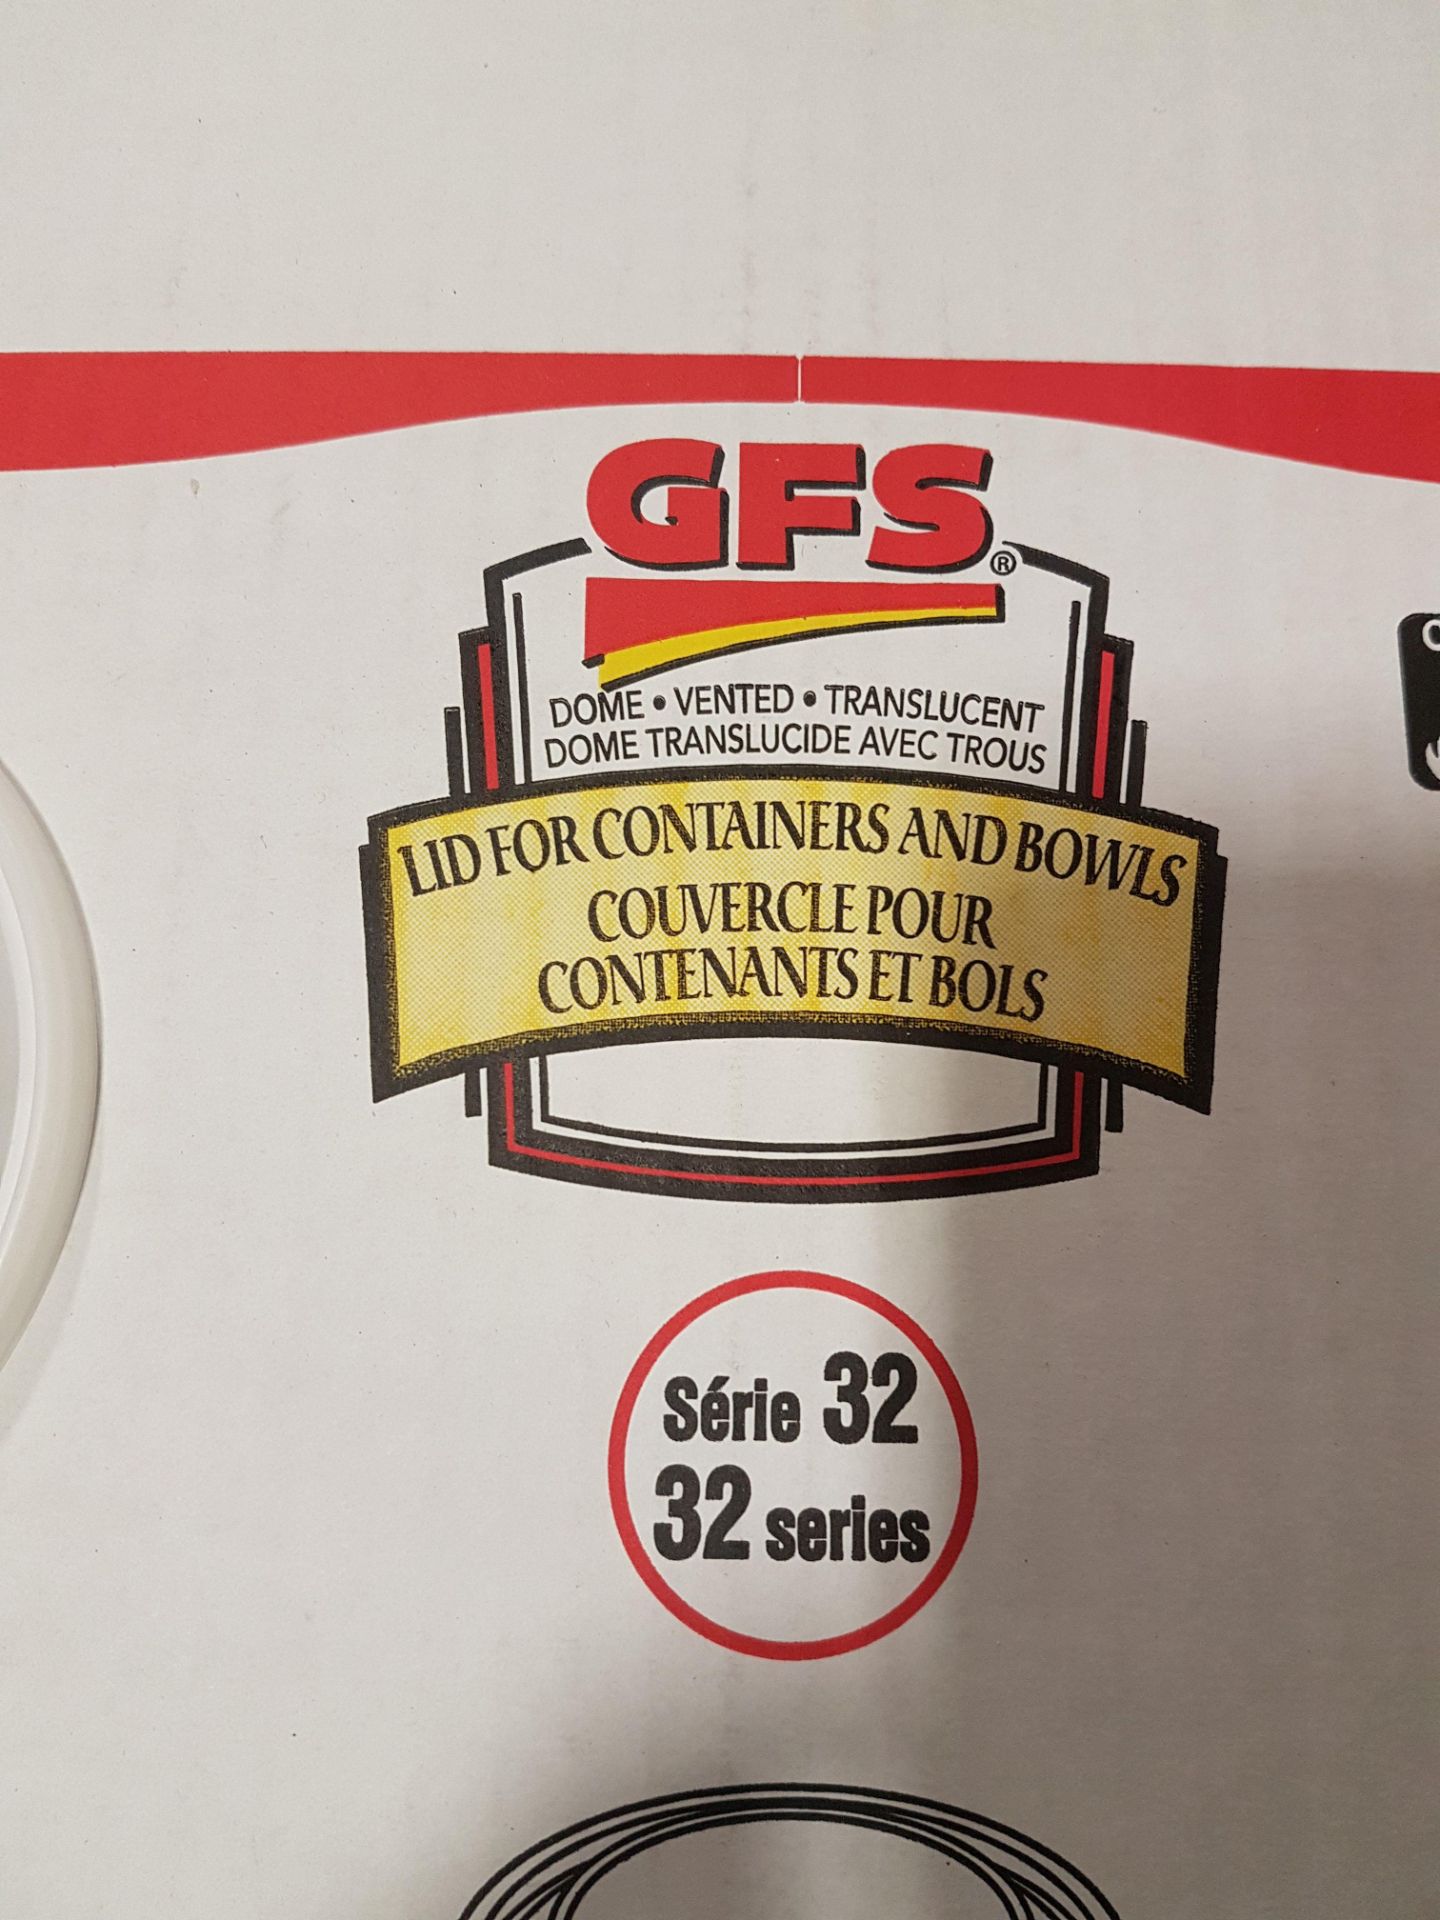 GFS Lid for Containers & Bowls (32 Series) - Case of 500 - Bild 2 aus 3